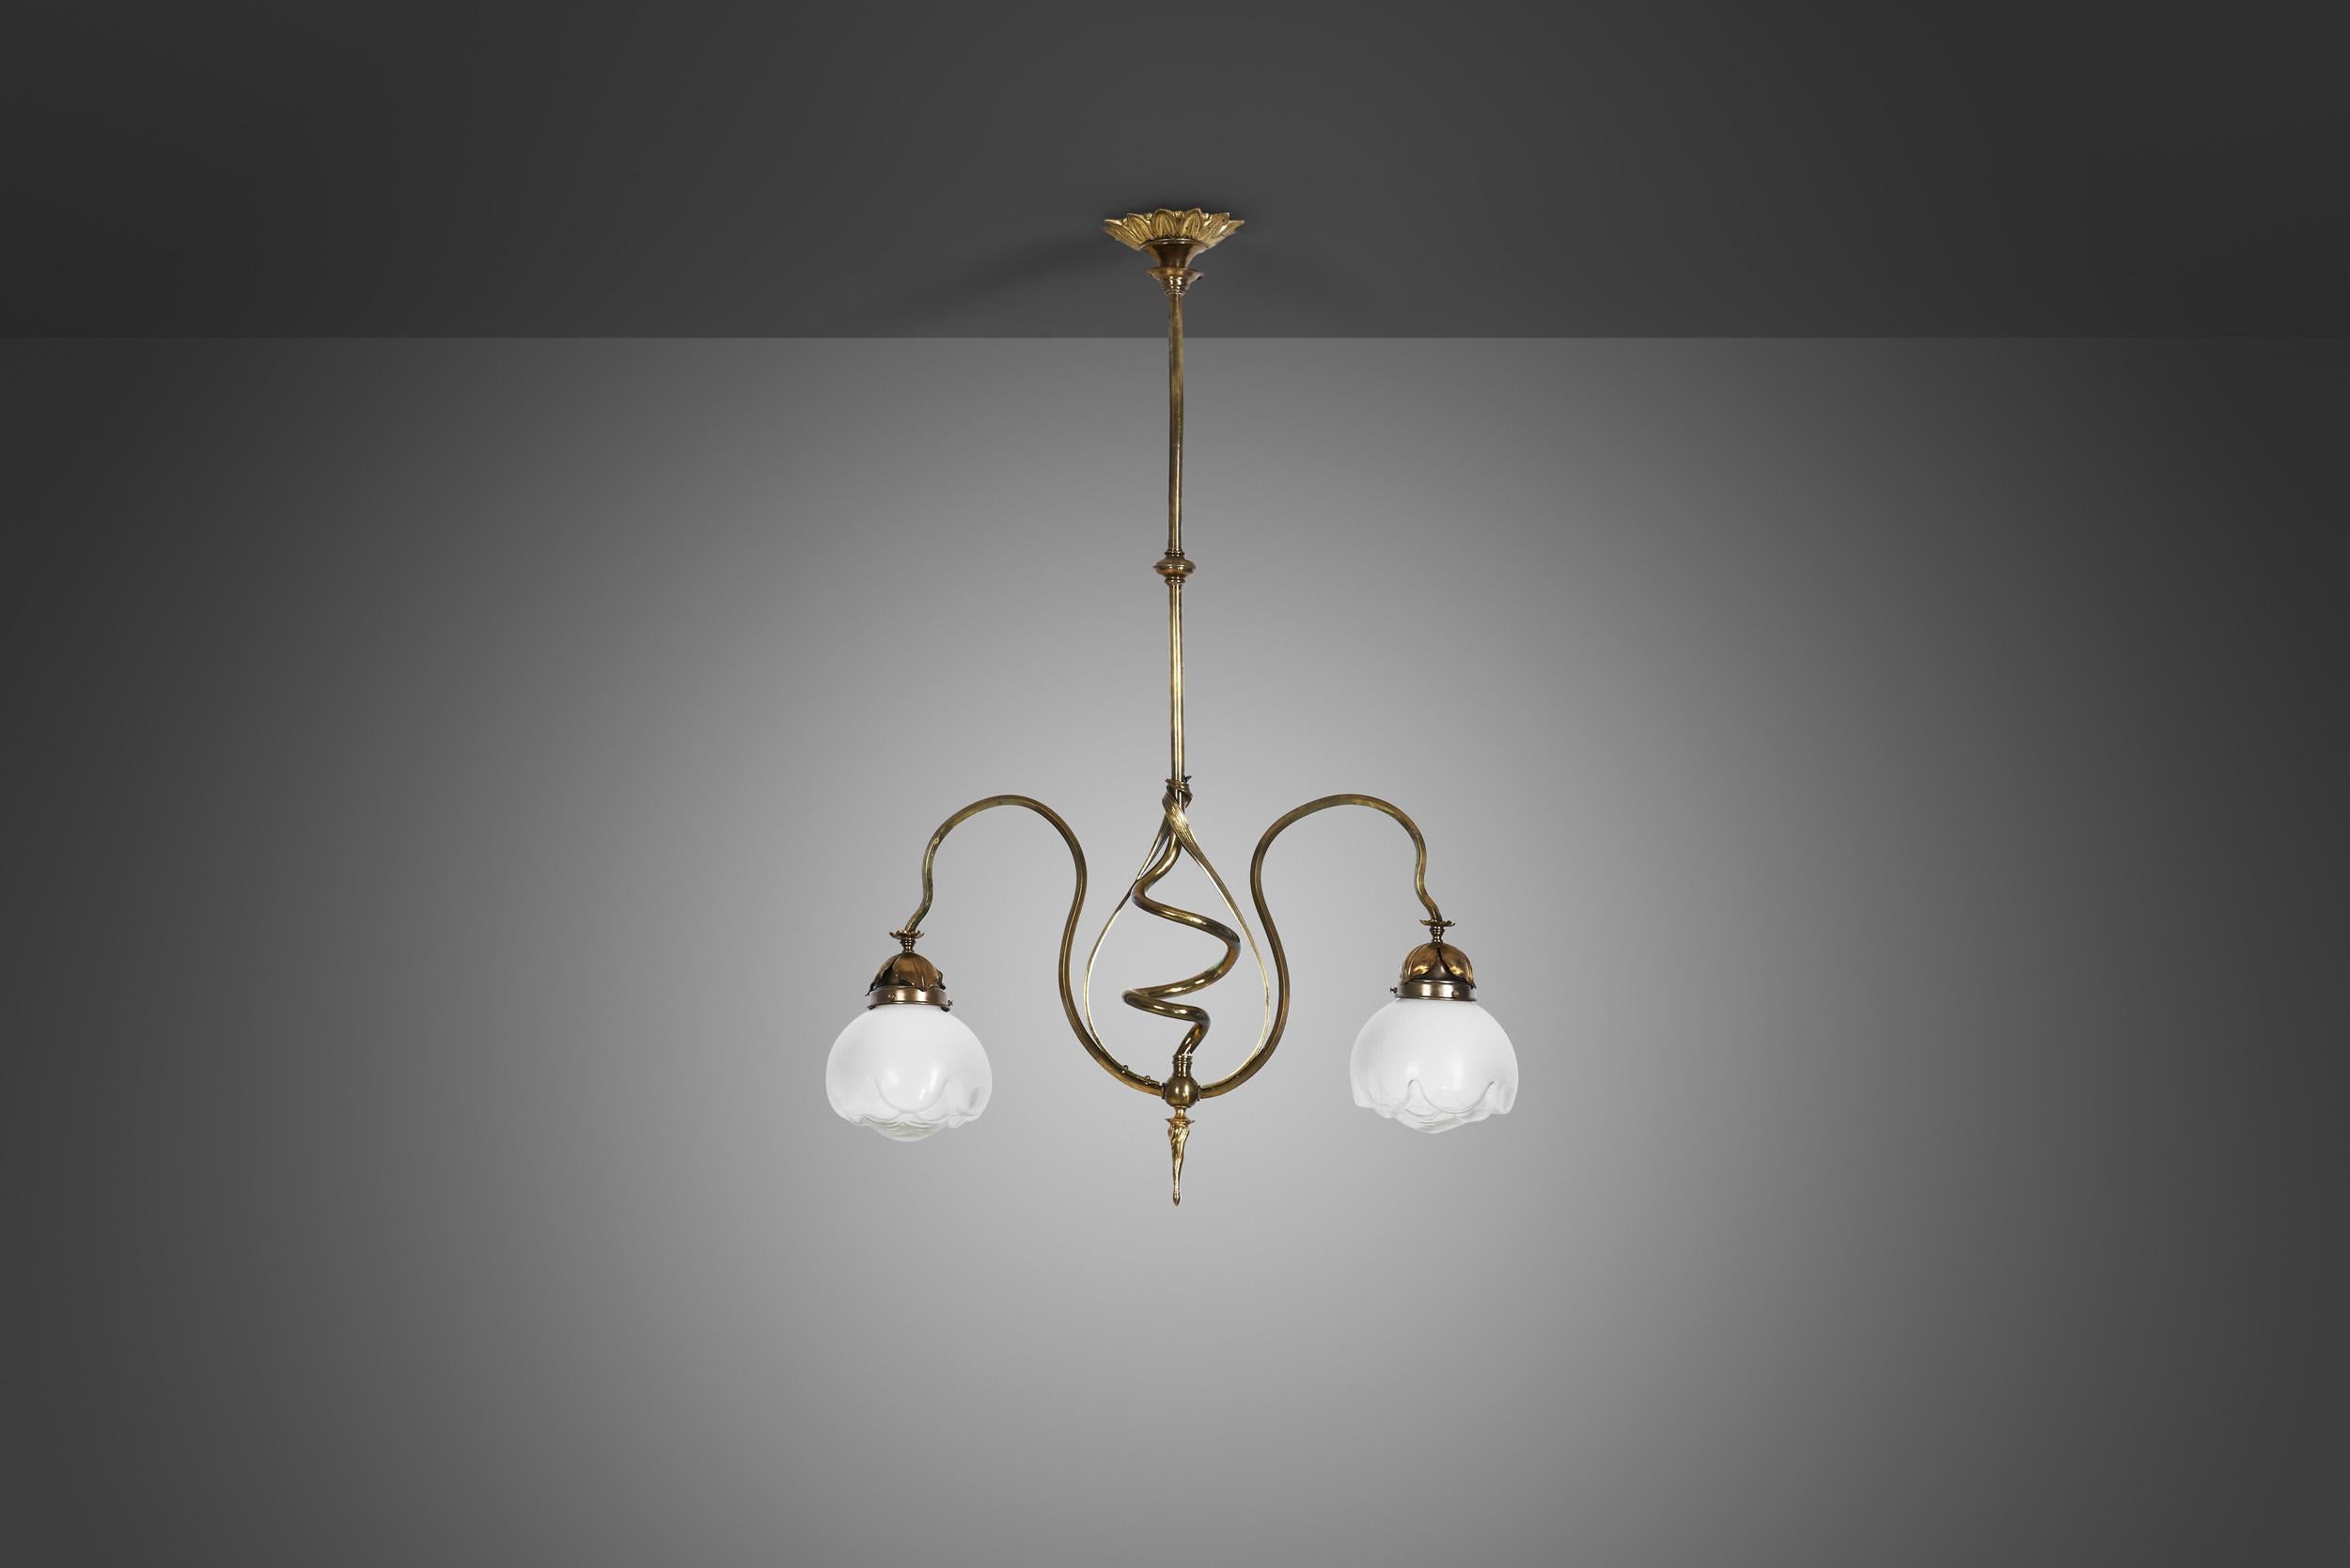 Mid-Century Modern Jugend Ceiling Lamp in Patinated Brass and Glass, Europe early 20th century For Sale